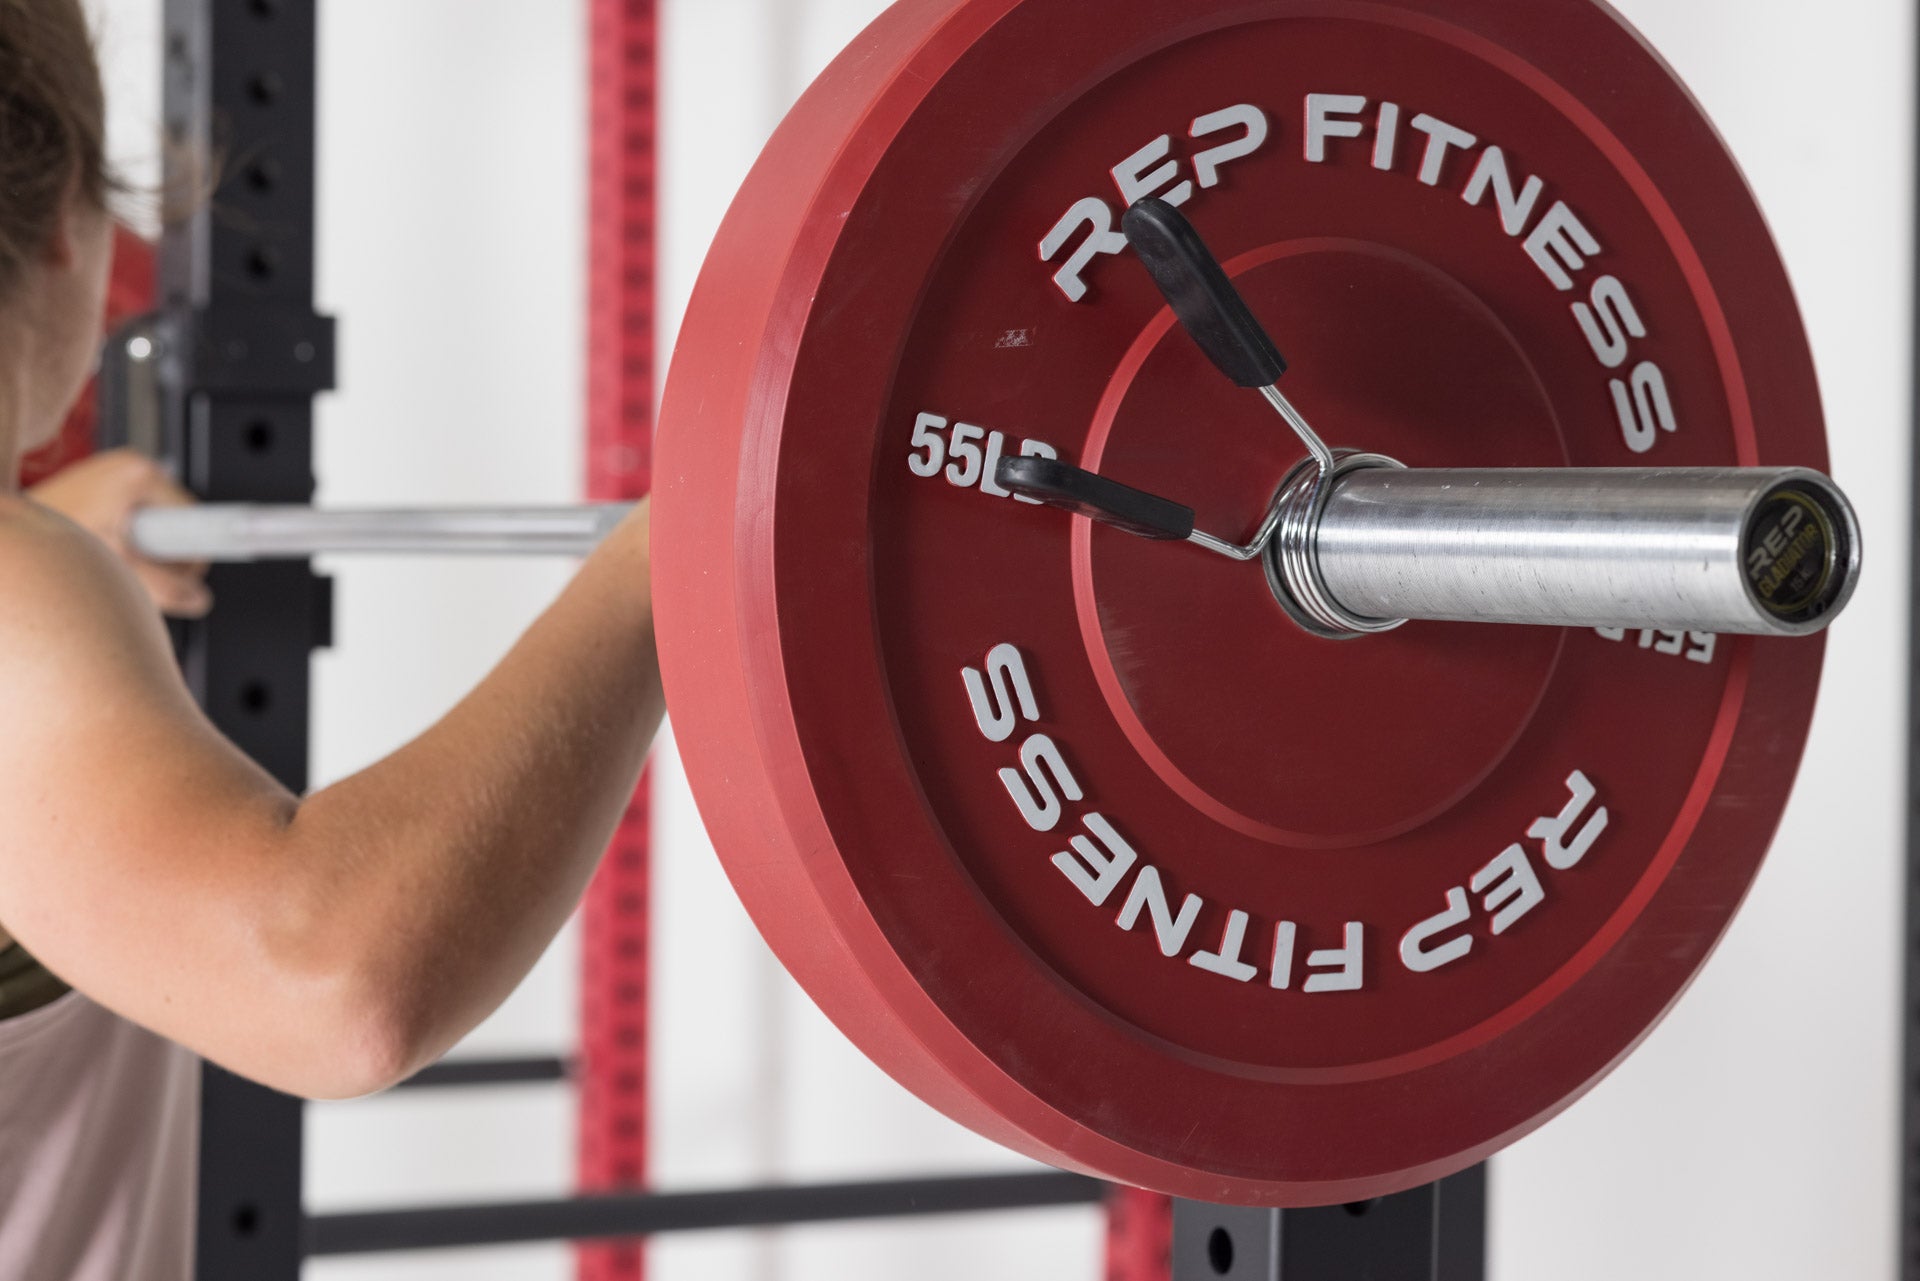 Close-up view of a red 55lb colored bumper plate loaded on a barbell that is racked on j-cups in a REP power rack.